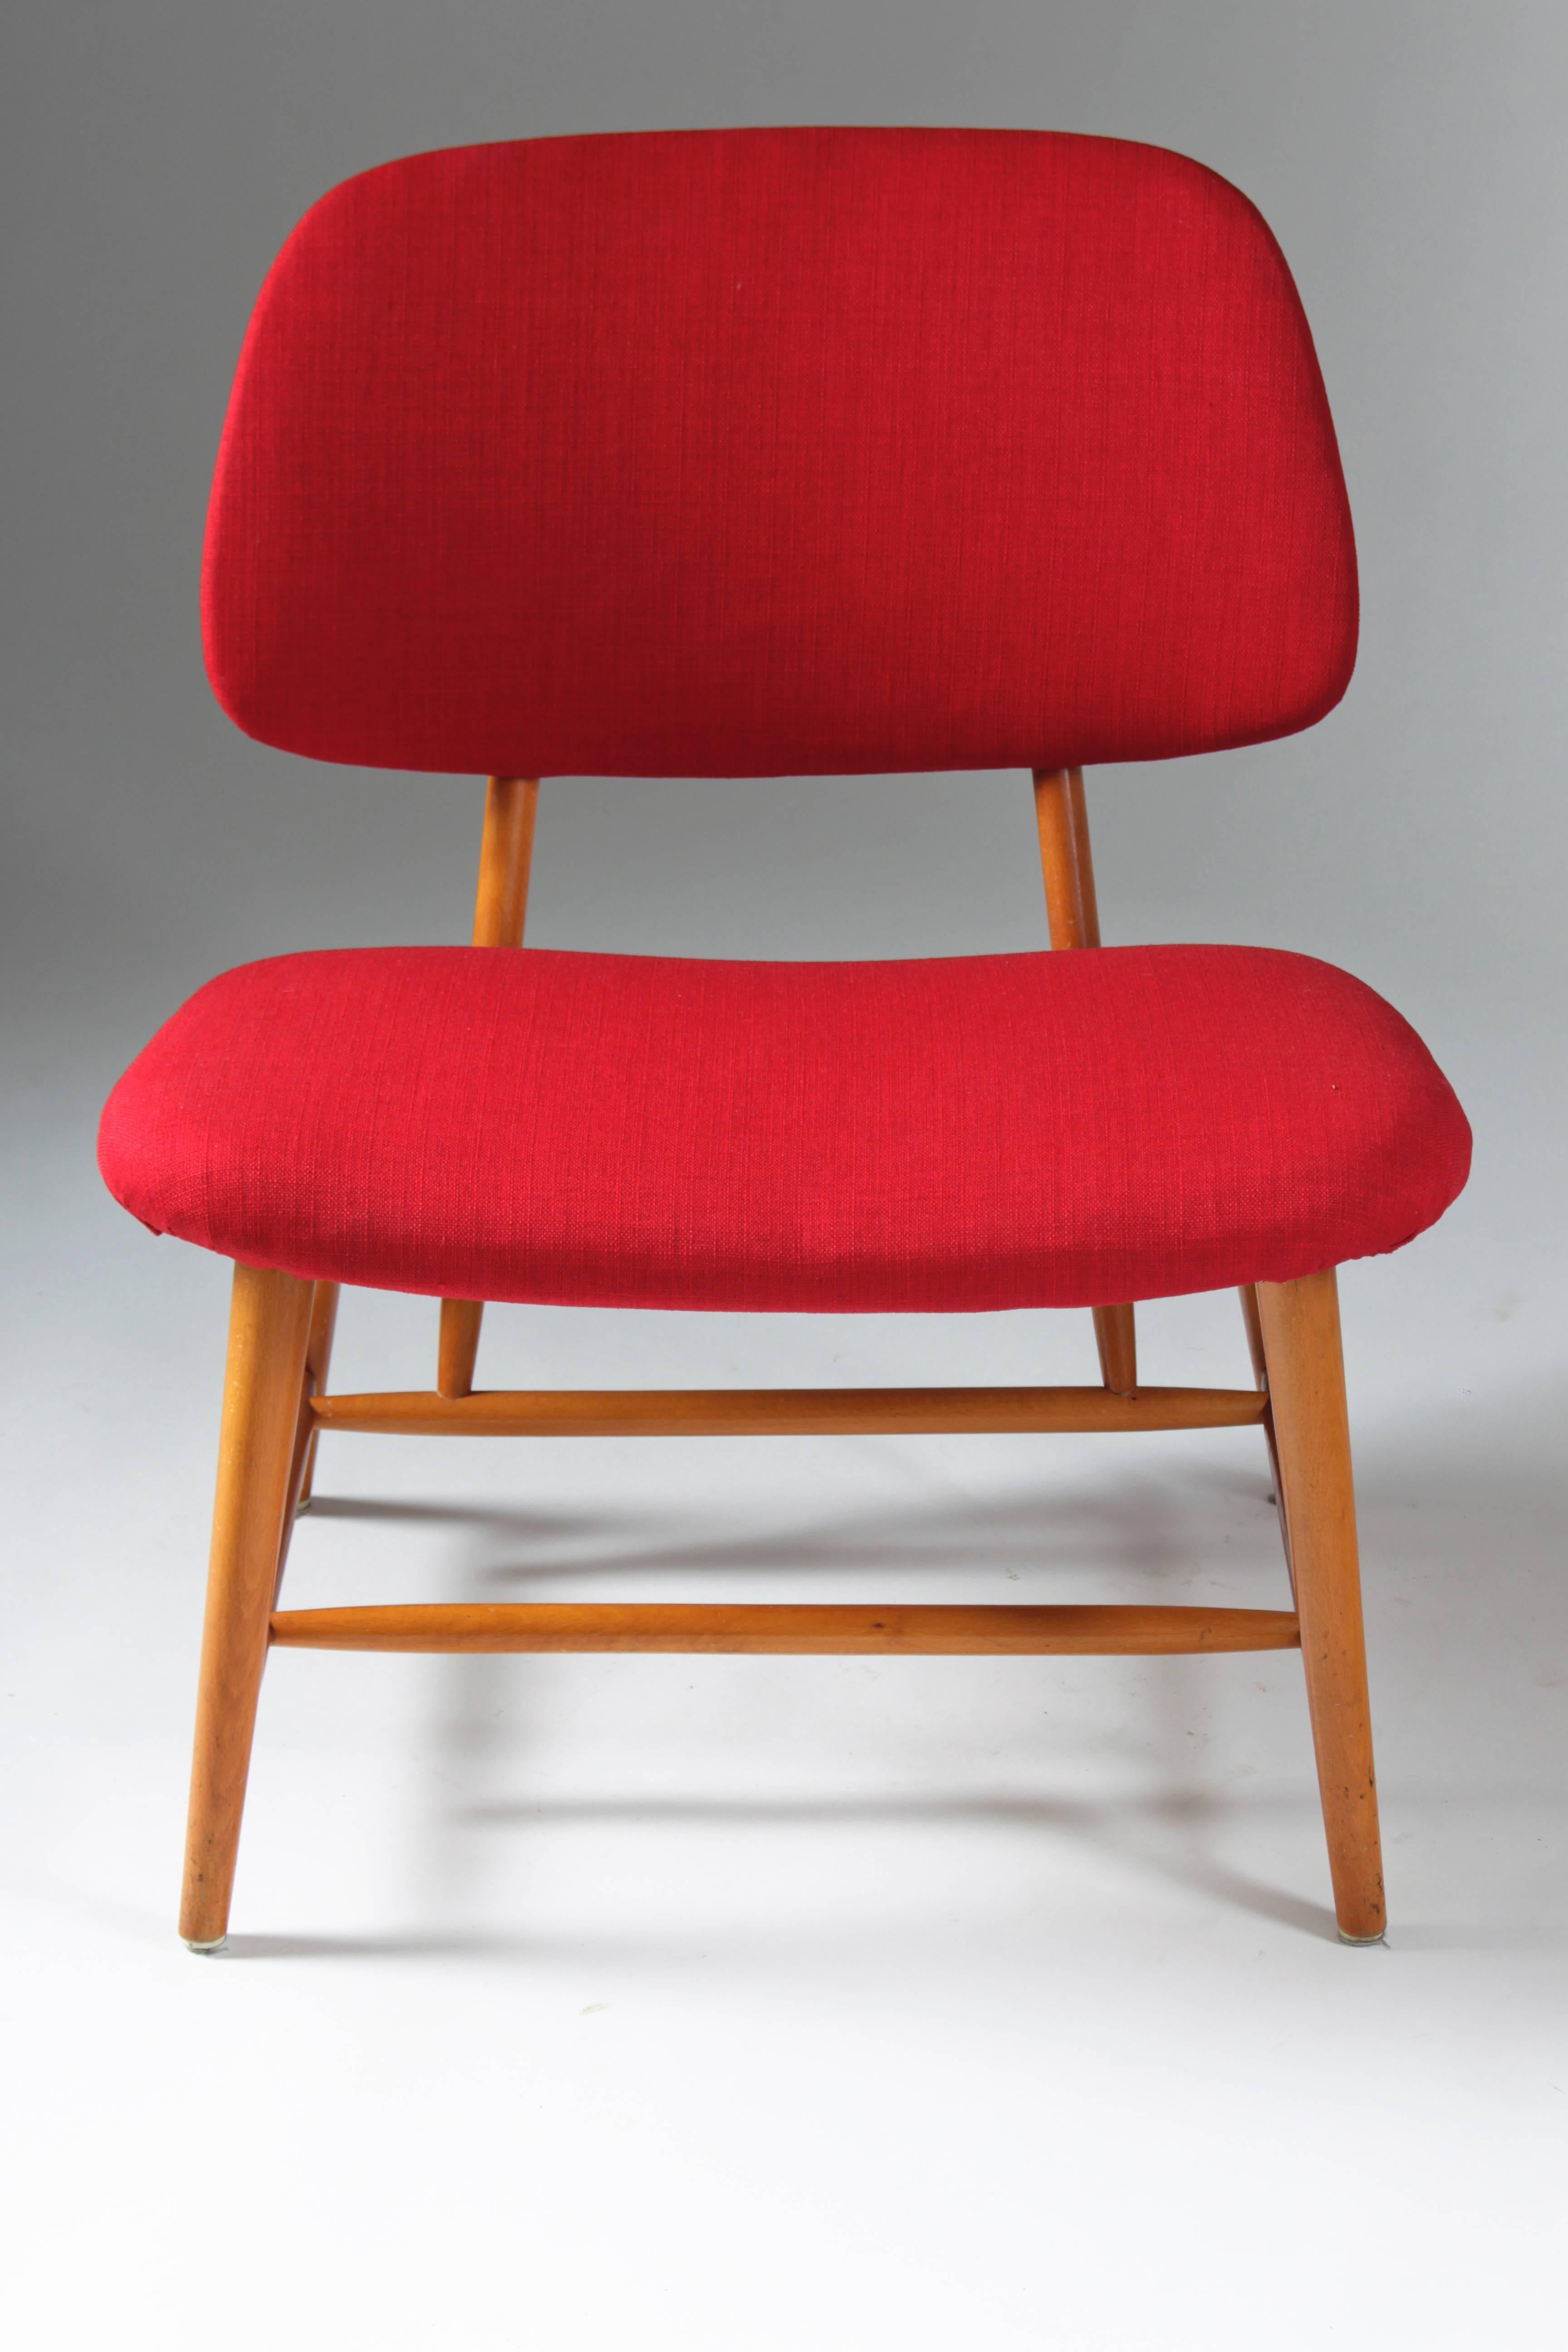 TeVe" Chairs by Alf Svensson for Ljungs Industrier, 1953 at 1stDibs